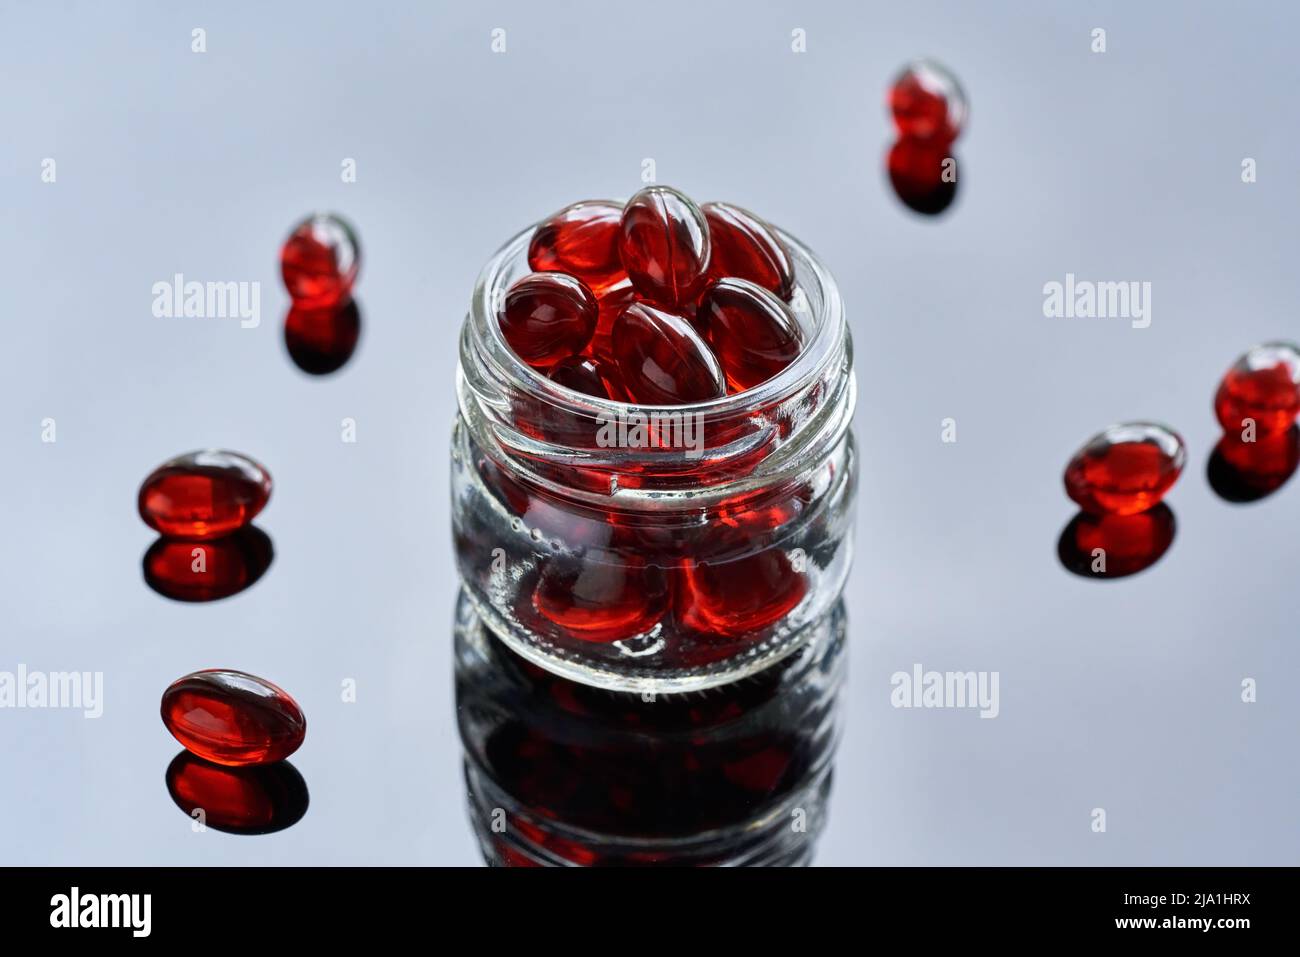 Krill oil pills or globules in a glass jar. - ealthy nutritional supplement rich in omega-3 fatty acids Stock Photo